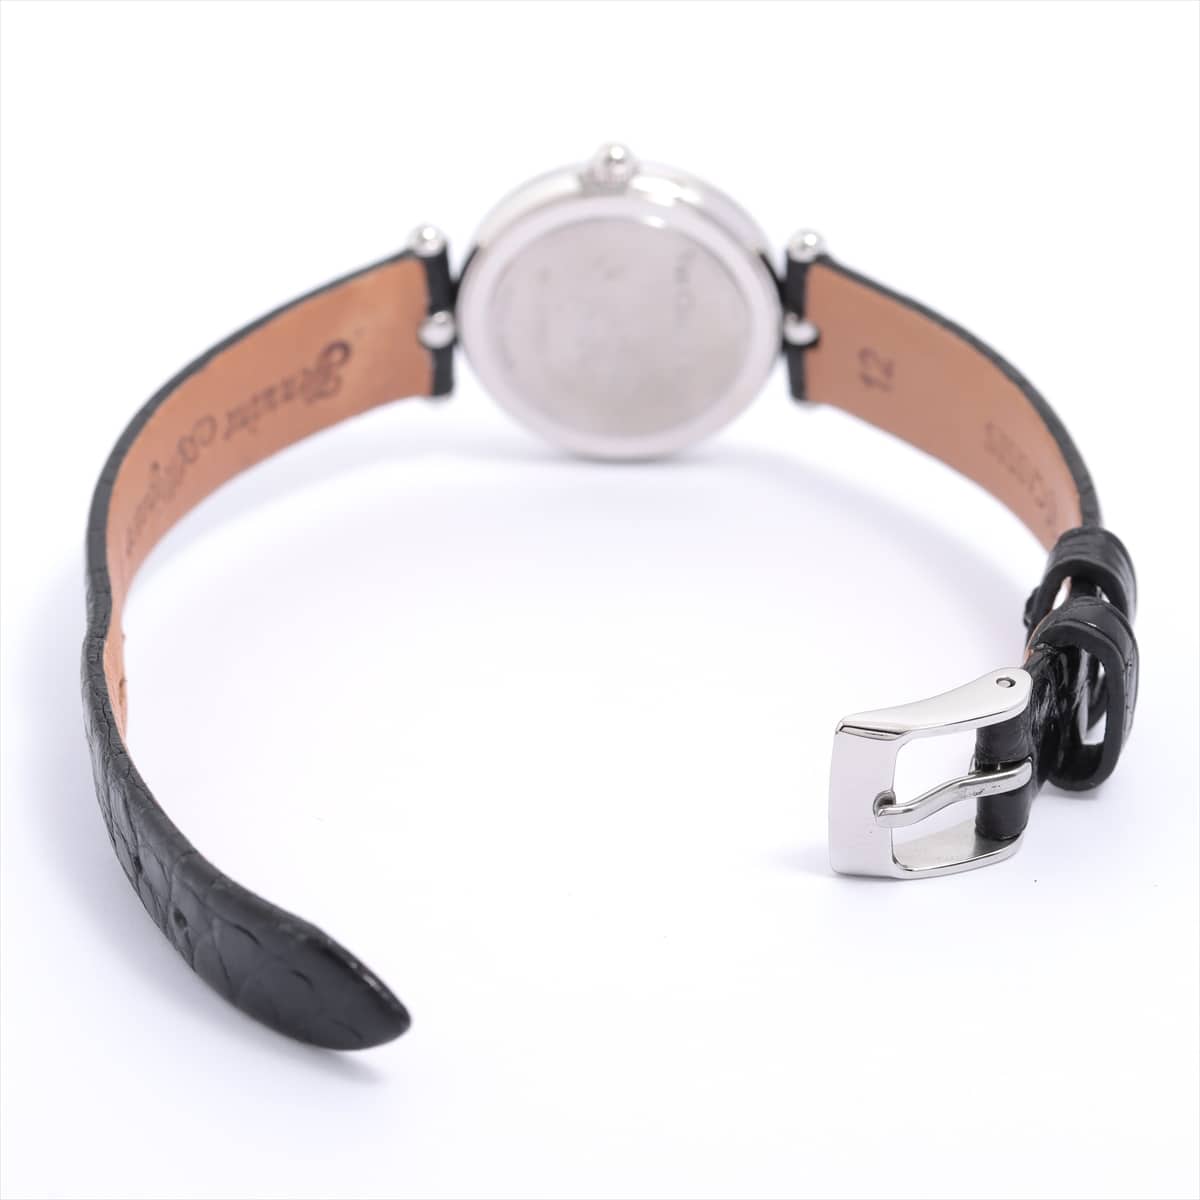 Van Cleef & Arpels Classic SS & externally manufactured leather QZ White-Face